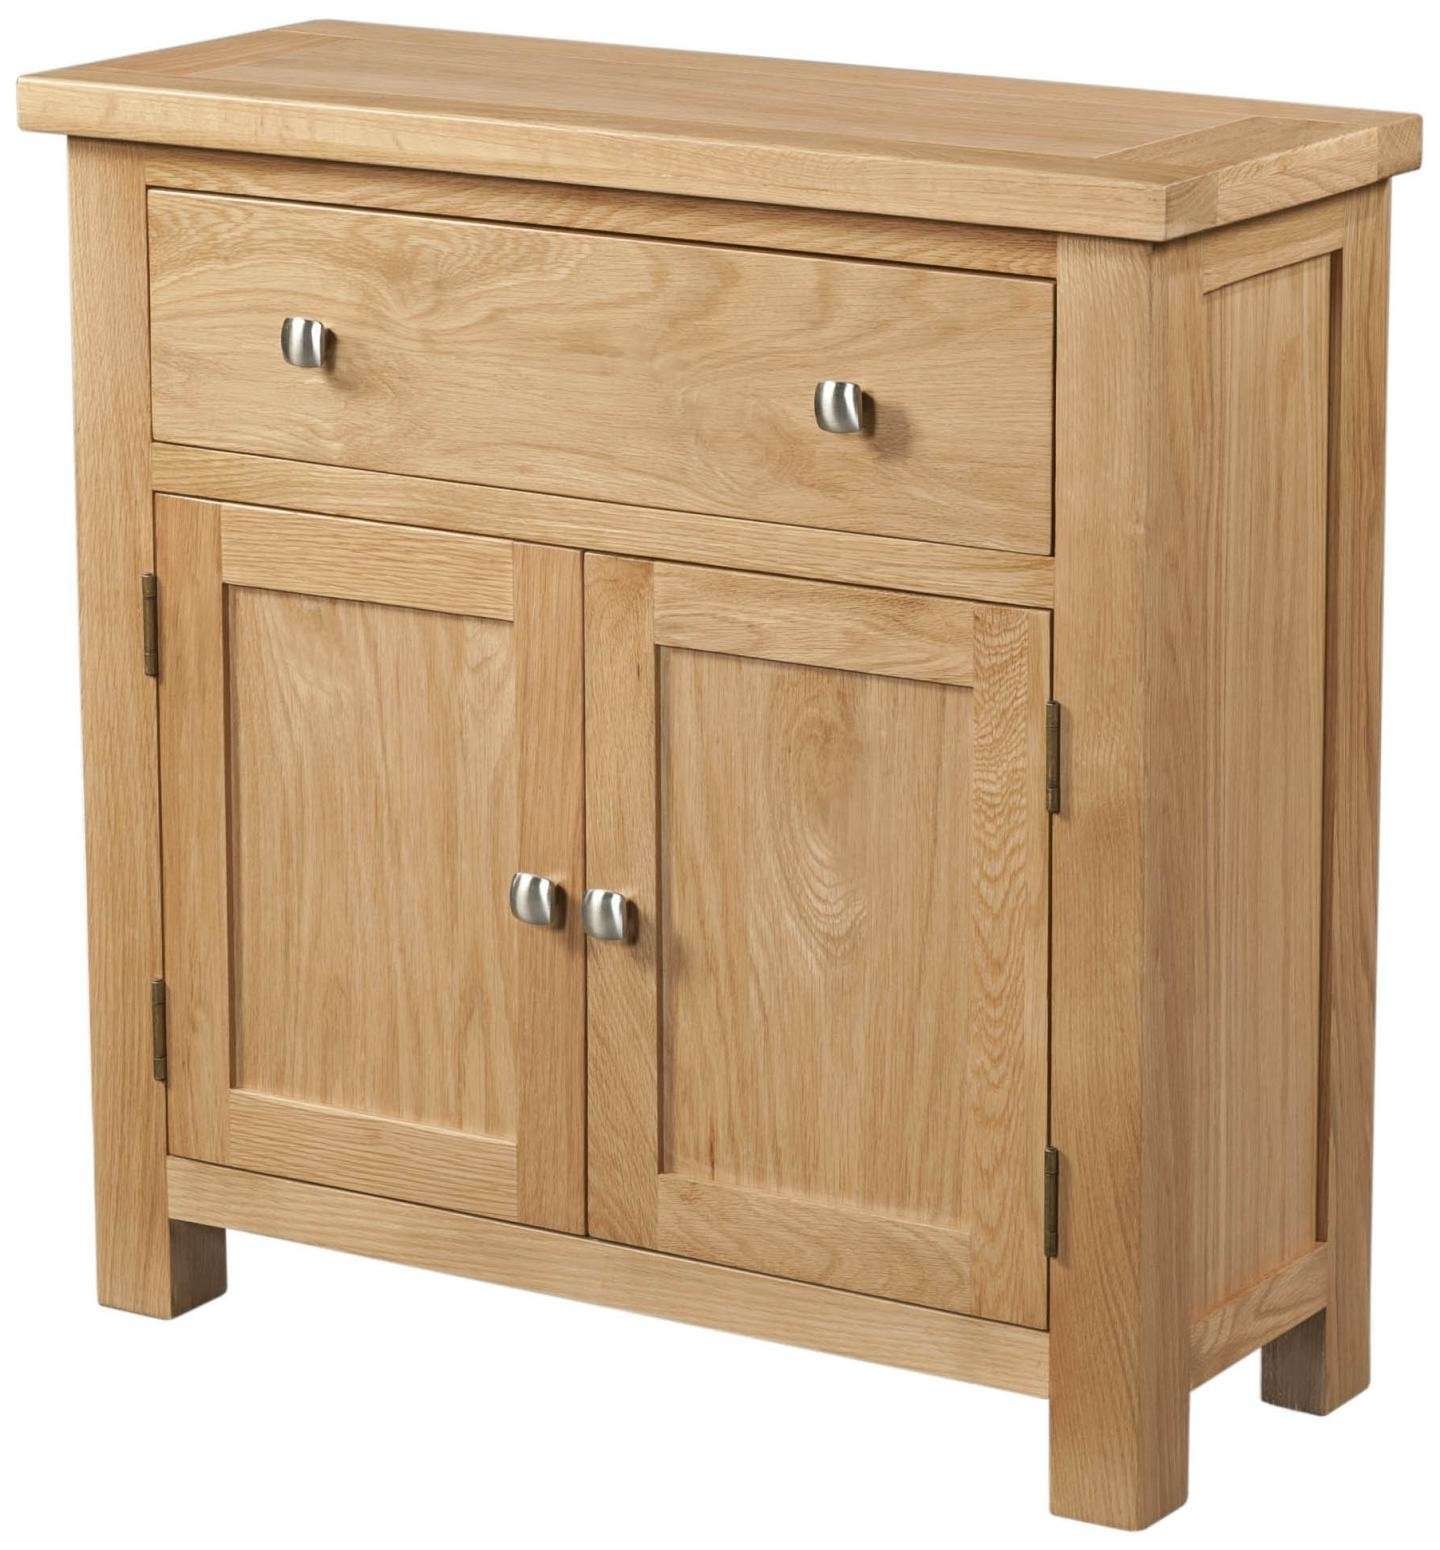 Abbey Oak Small Sideboard Pertaining To Small Sideboards (View 7 of 20)